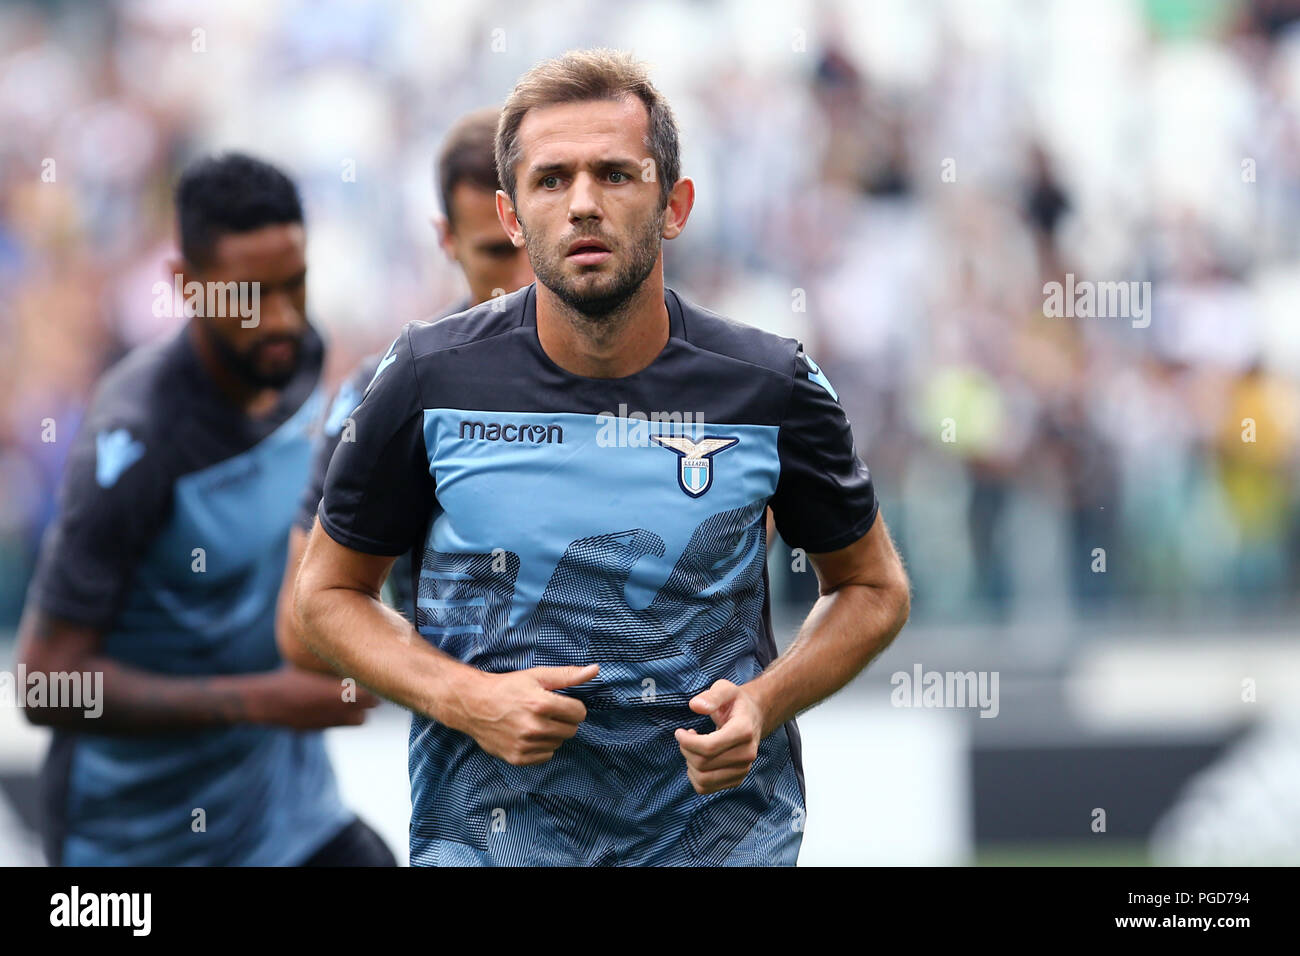 Torino, Italy. 25th August, 2018. Senad Lulic  of SS Lazio during the Serie A football match between Juventus Fc and SS Lazio.  Credit: Marco Canoniero / Alamy Live News  . Credit: Marco Canoniero/Alamy Live News Stock Photo